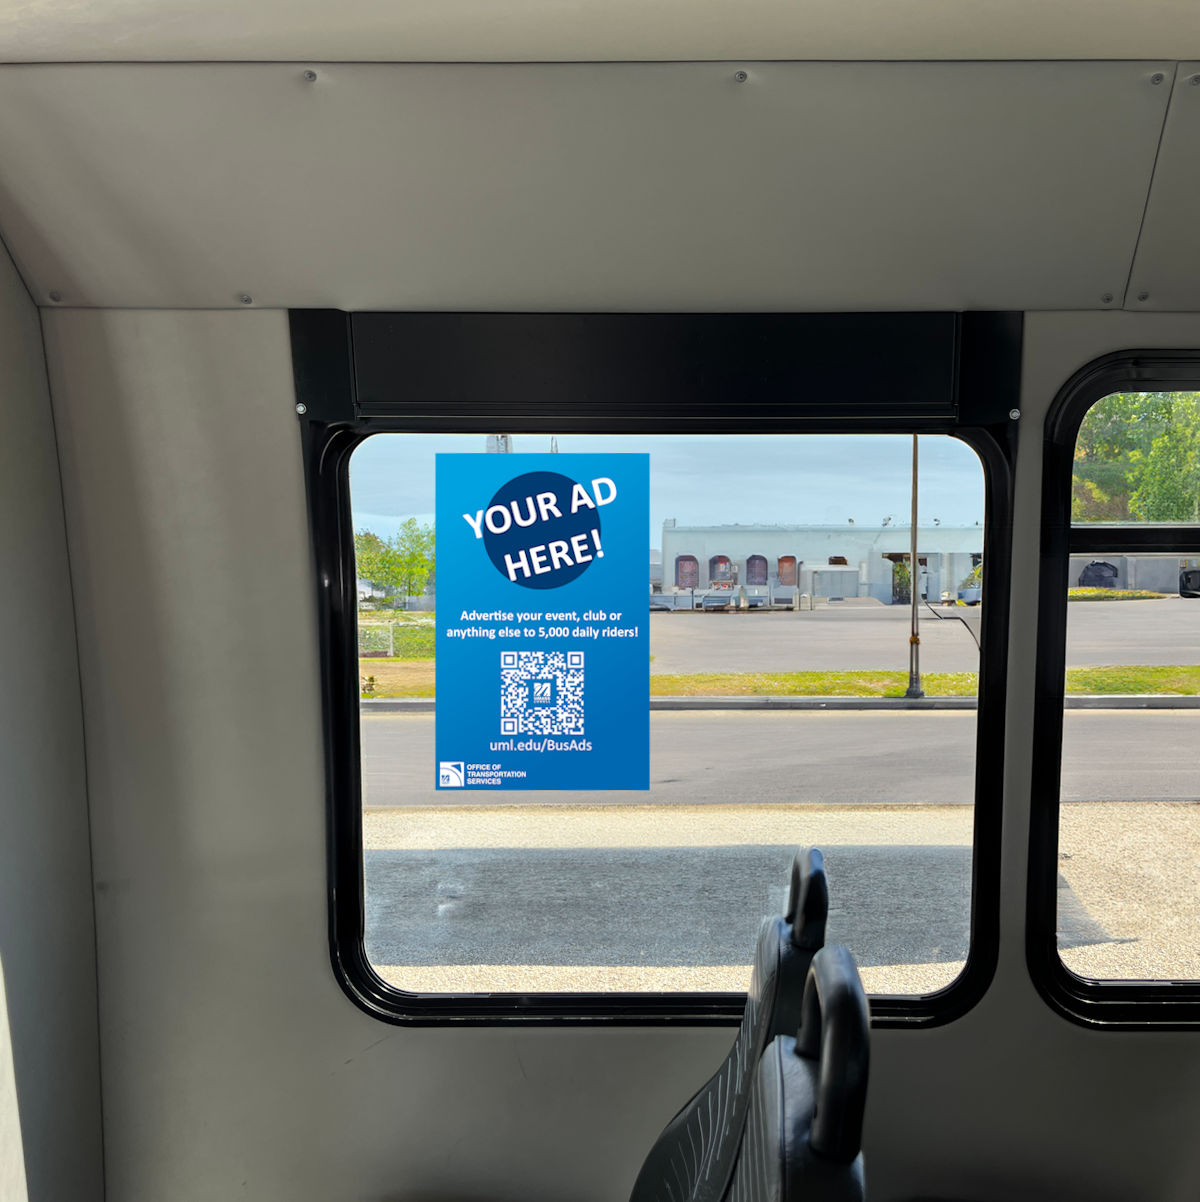 A blue example advertisement is displayed on the inside window of a shuttle.